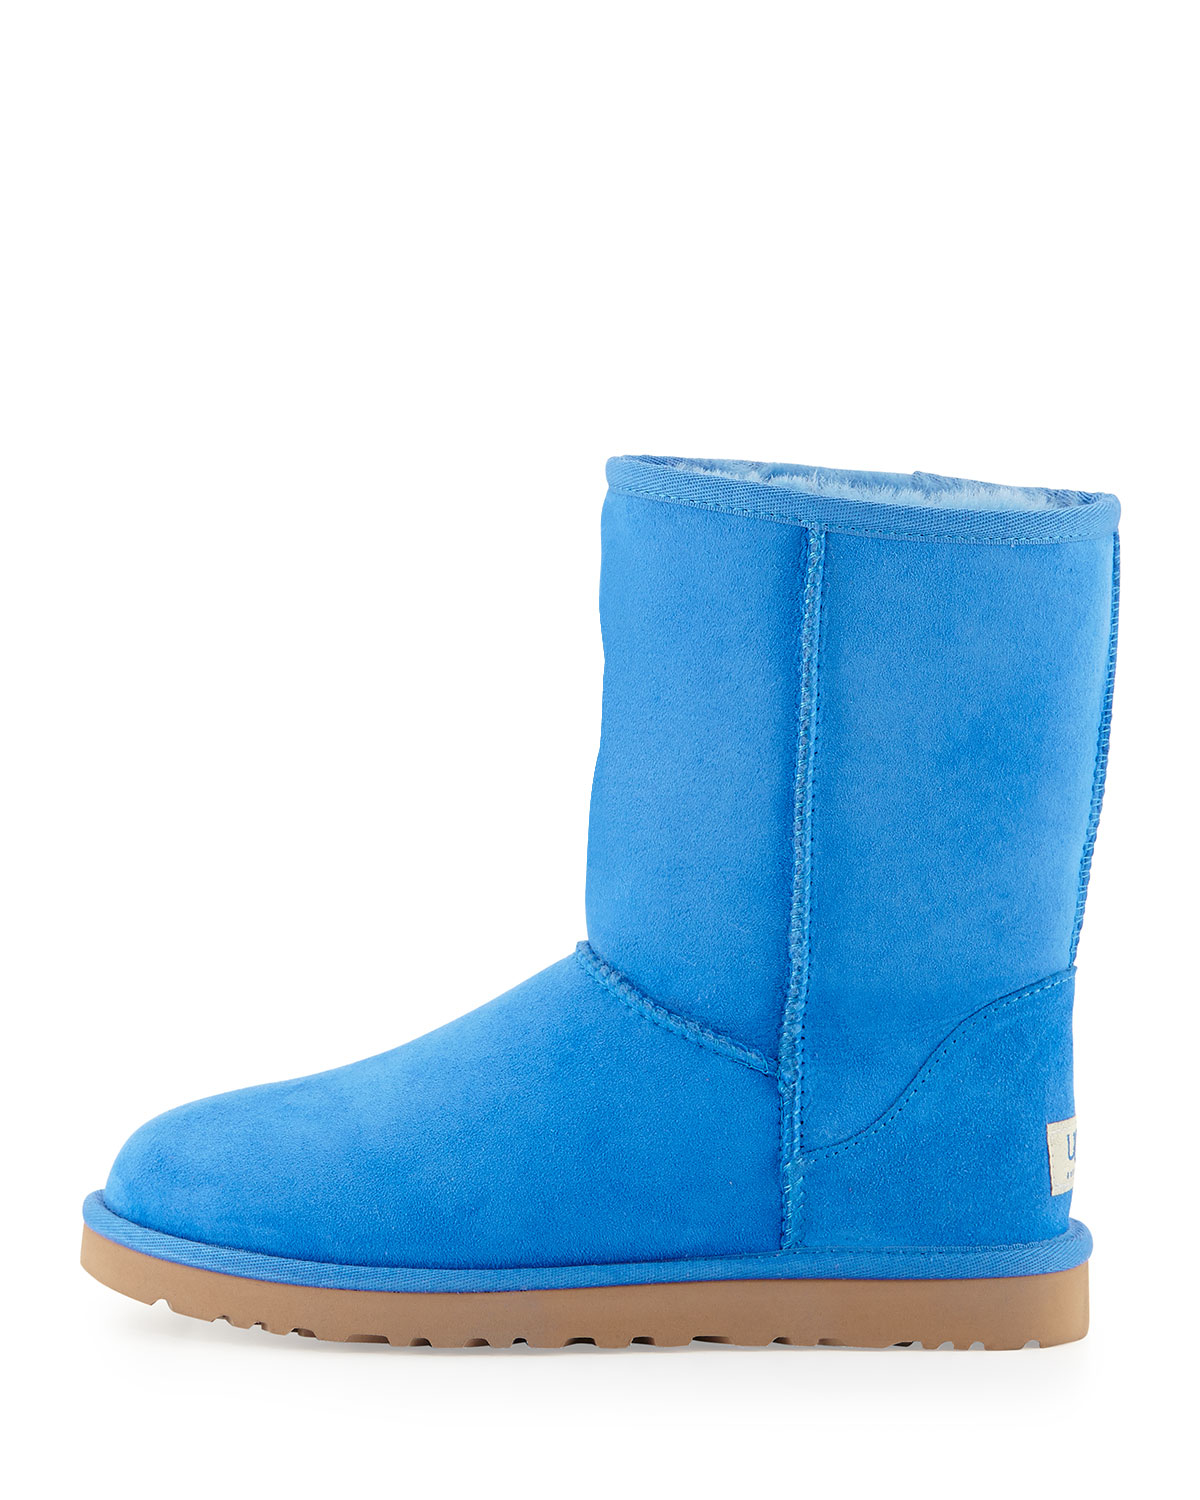 Lyst - Ugg Classic Short Boot in Blue